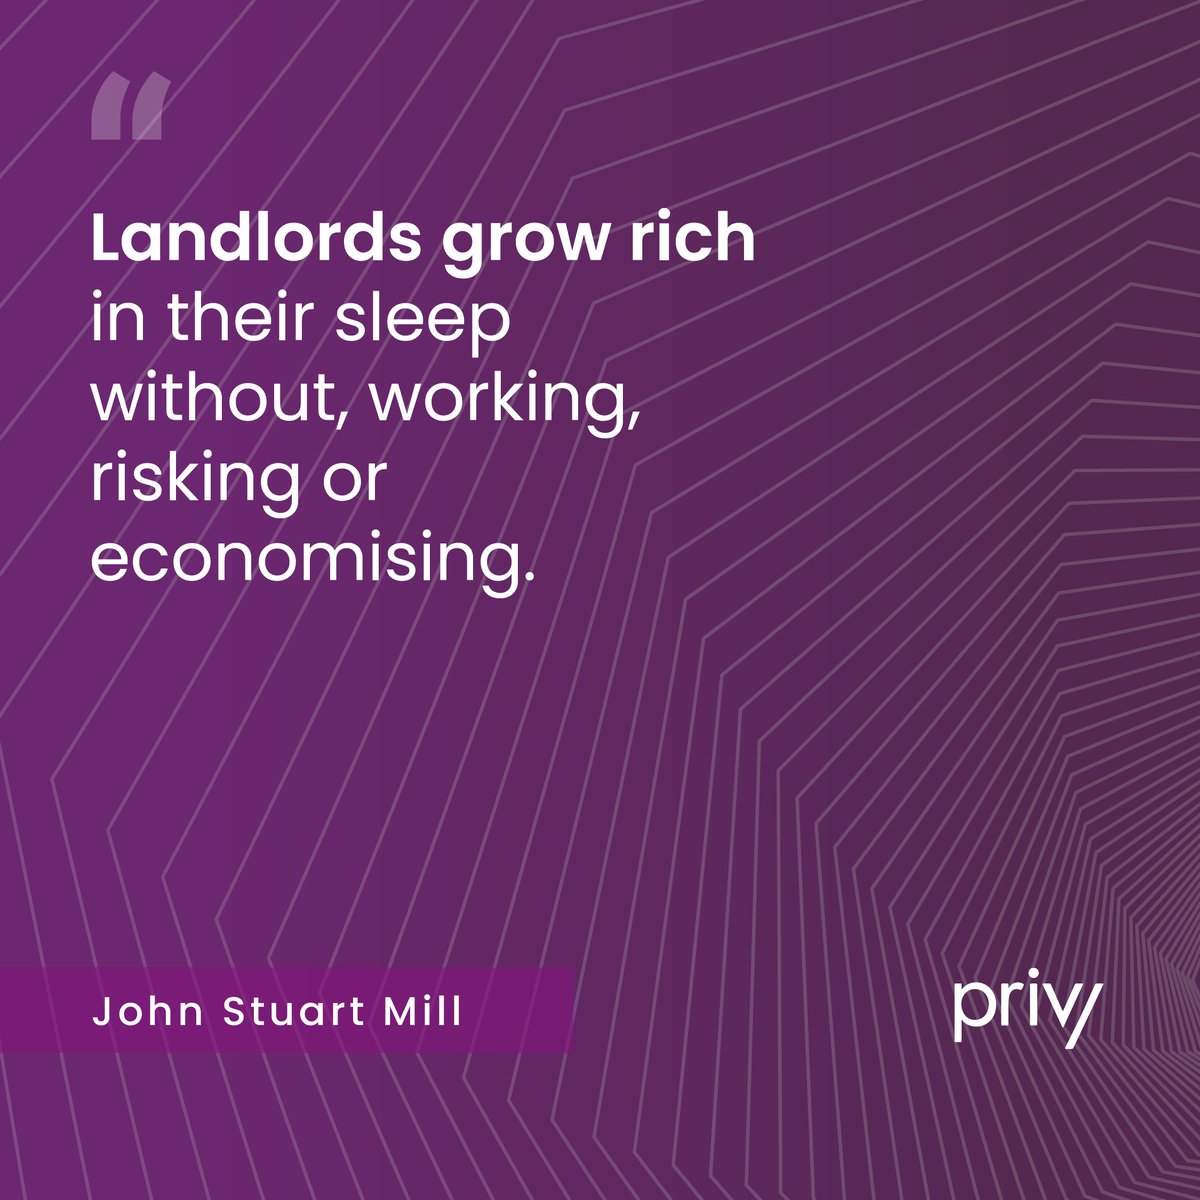 Quote of the Day #QOTD 🌐 #newrelease #rentaldata #longtermrentals #passiveincome   hubs.ly/Q01X4jvF0 Become a #Landlord with Privy!